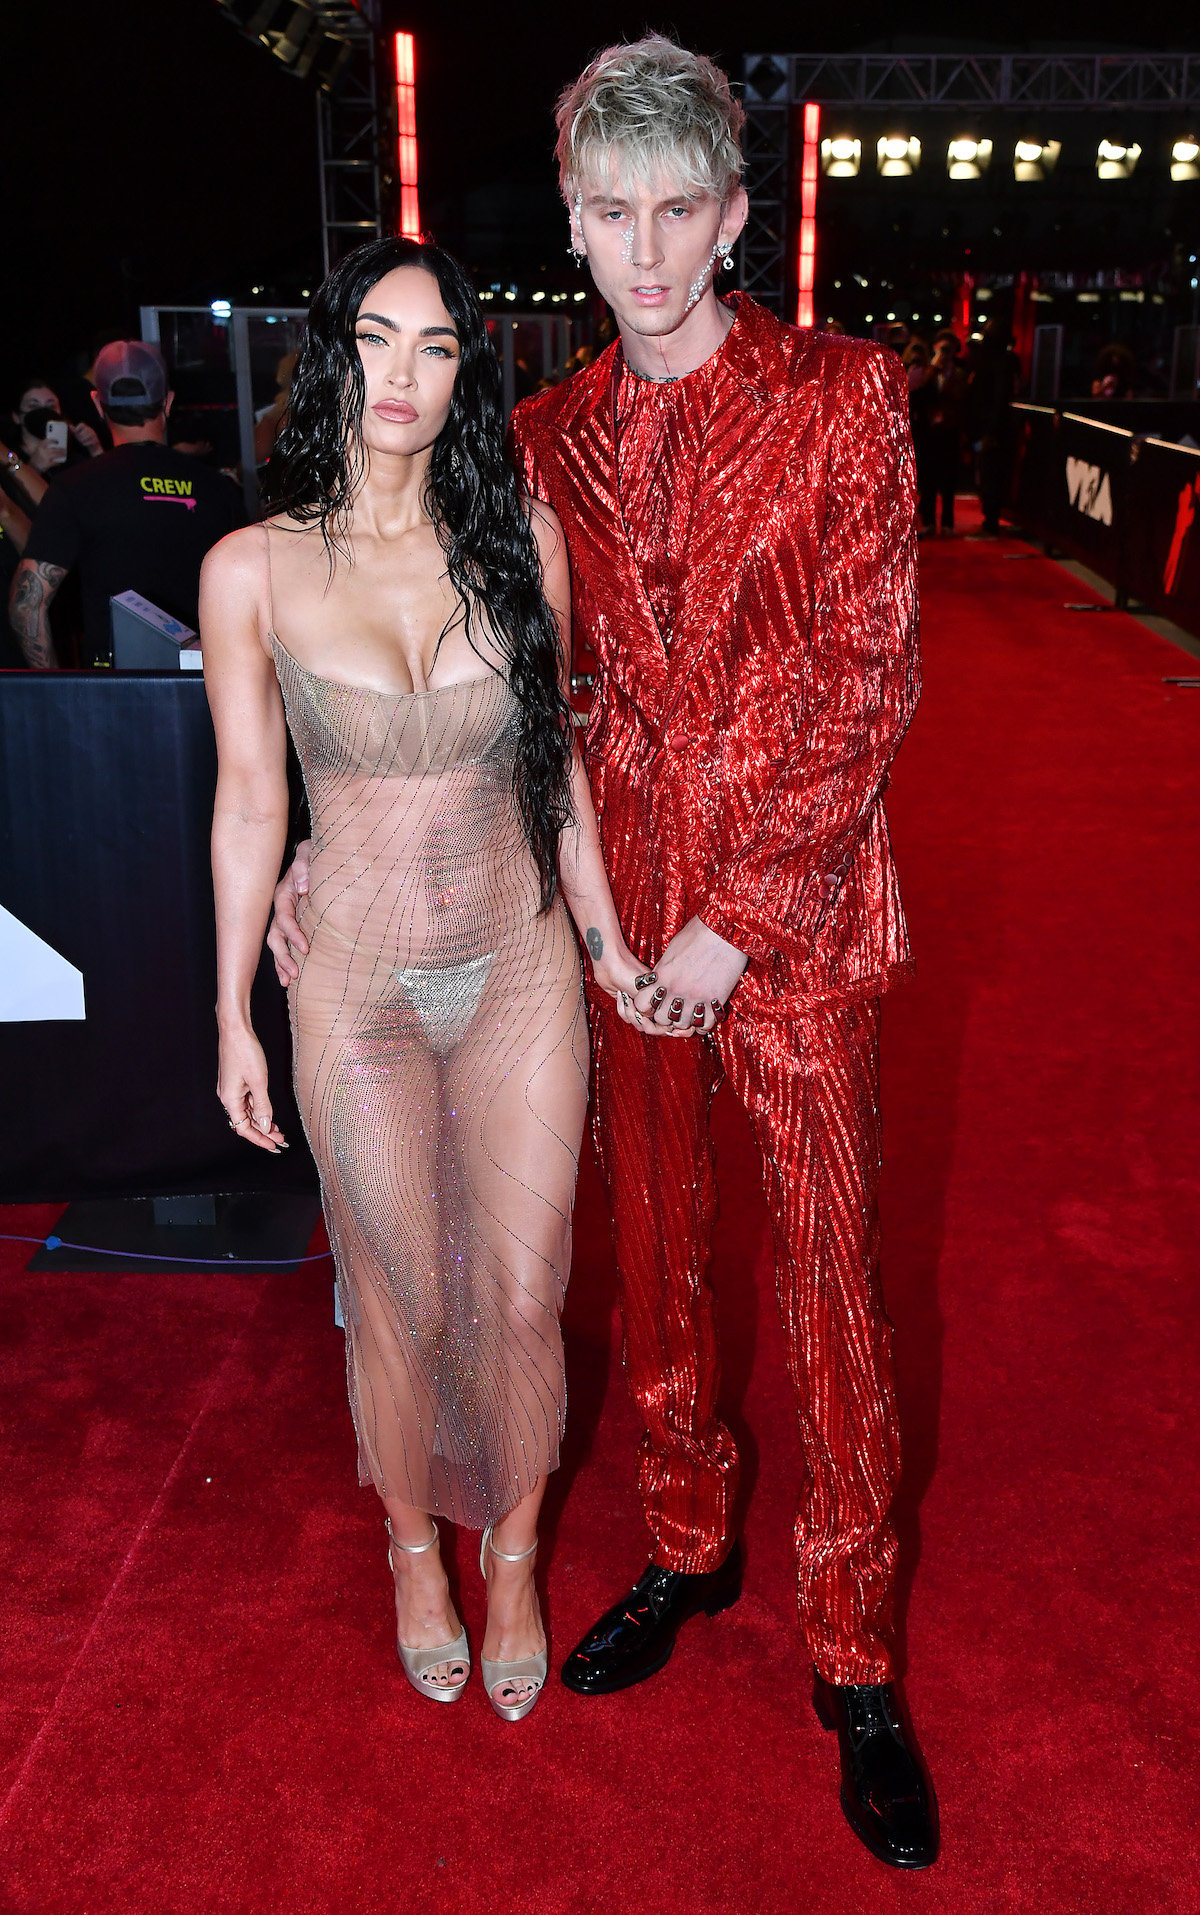 Megan Fox and Machine Gun Kelly pose together on the VMAs red carpet.